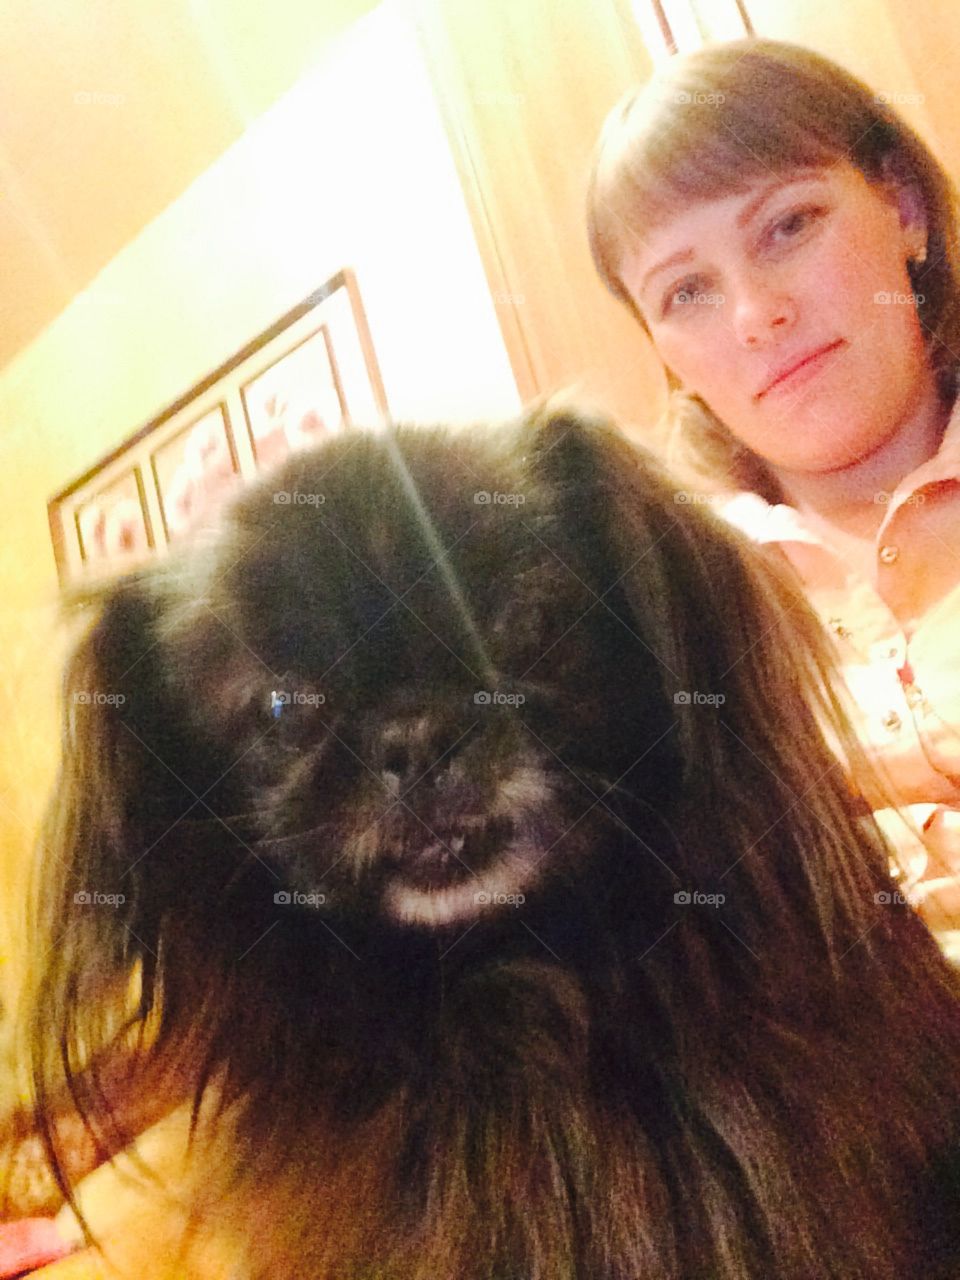 Pekingese dog in the arms of the mistress